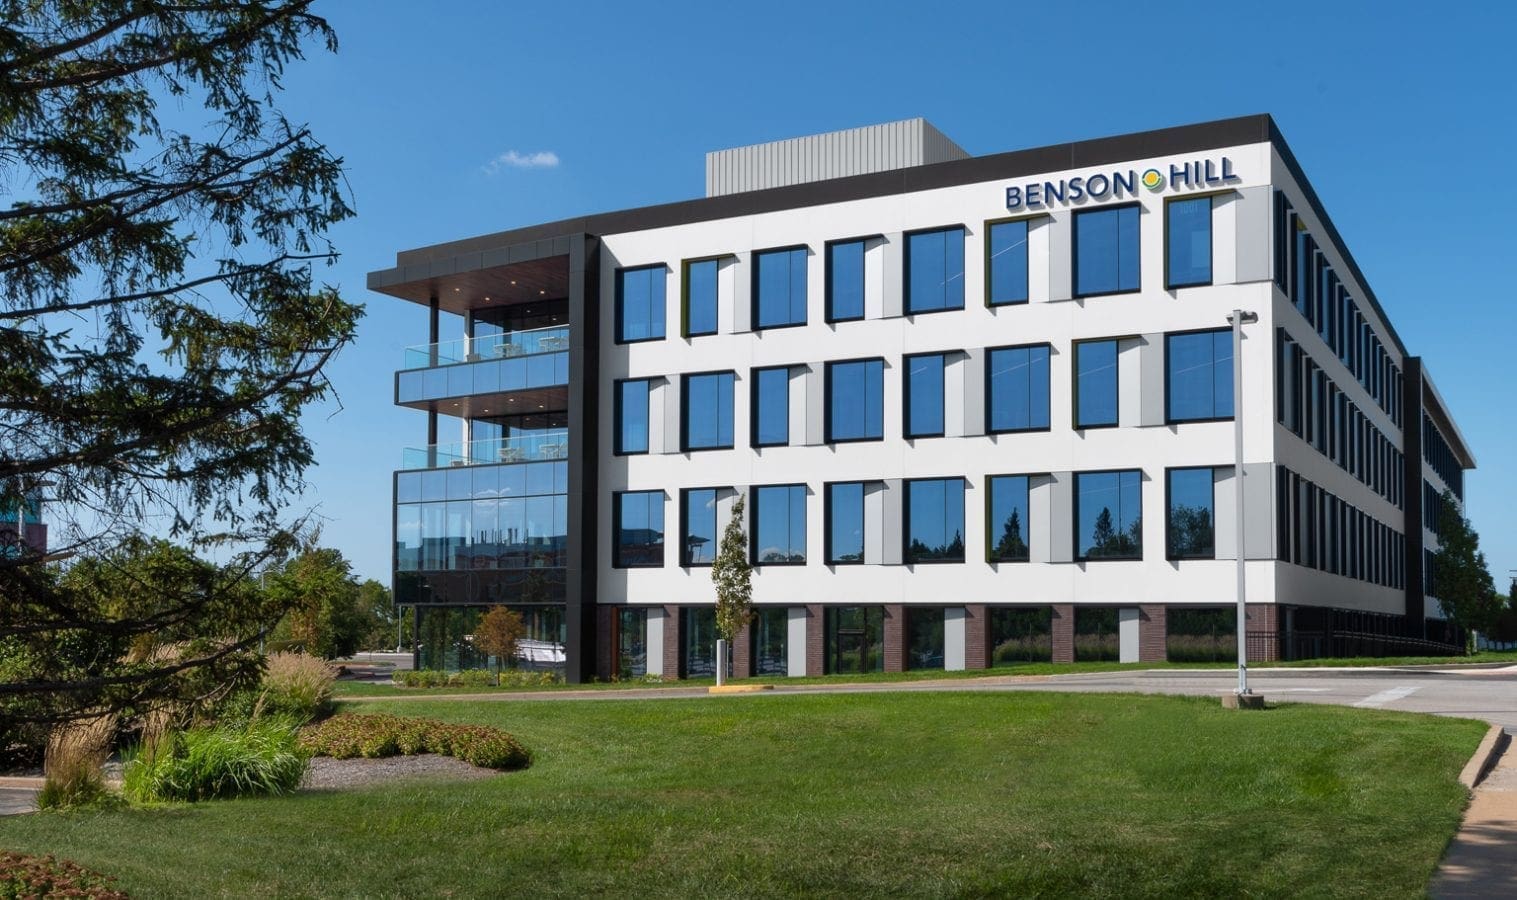 Benson Hill doubles down on plant-based ingredients as research shows US$3.1Bn was invested alternative proteins in 2020